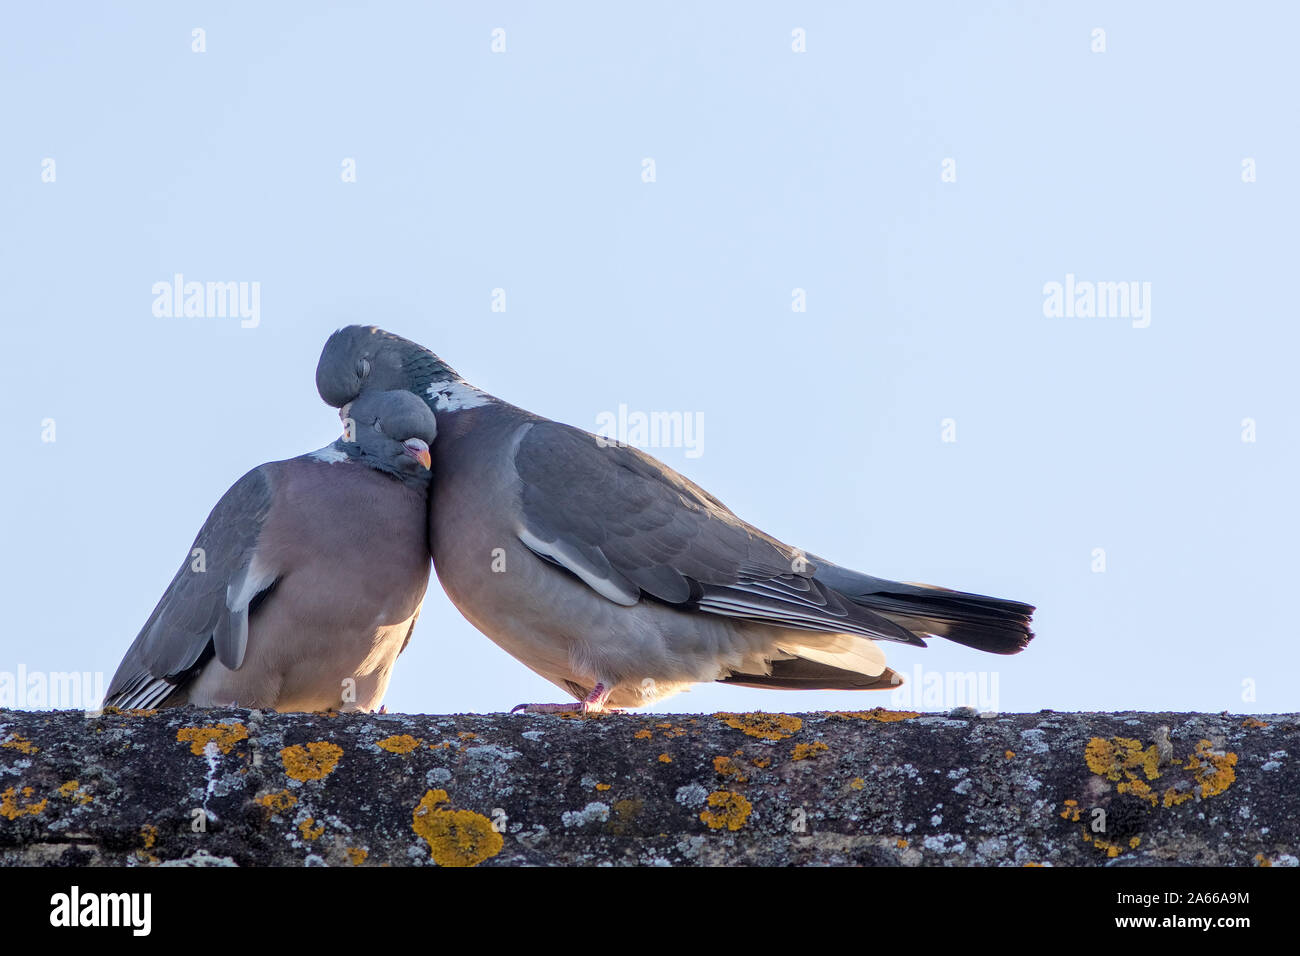 Animals in love. Breeding pair of birds preening with affection. Wood pigeon showing emotional engagement as they preen on a roof top. Emotion and fee Stock Photo